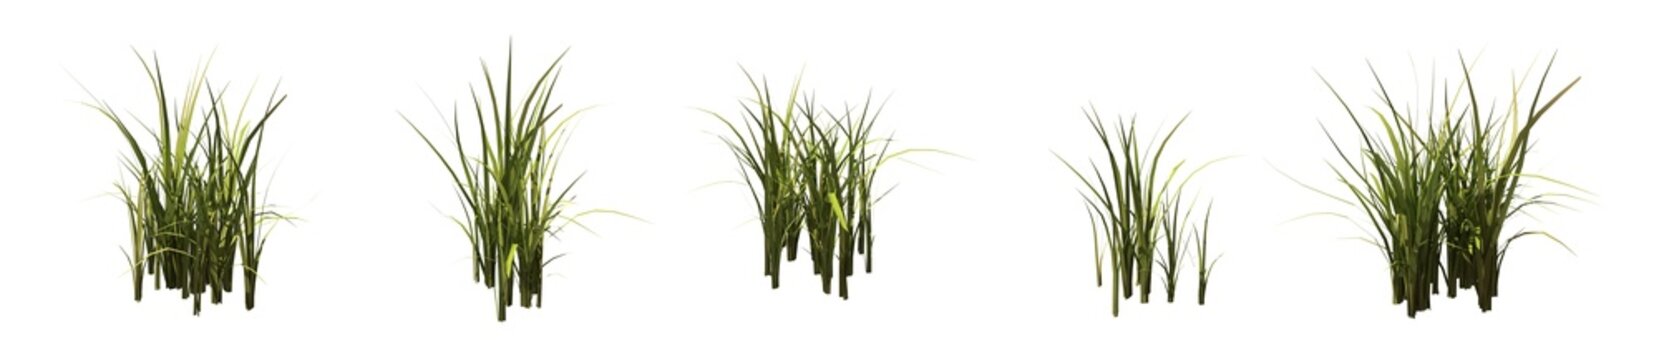 Set of grass bushes isolated. Nutsedge or Nutgrass. Cyperus. 3D illustration